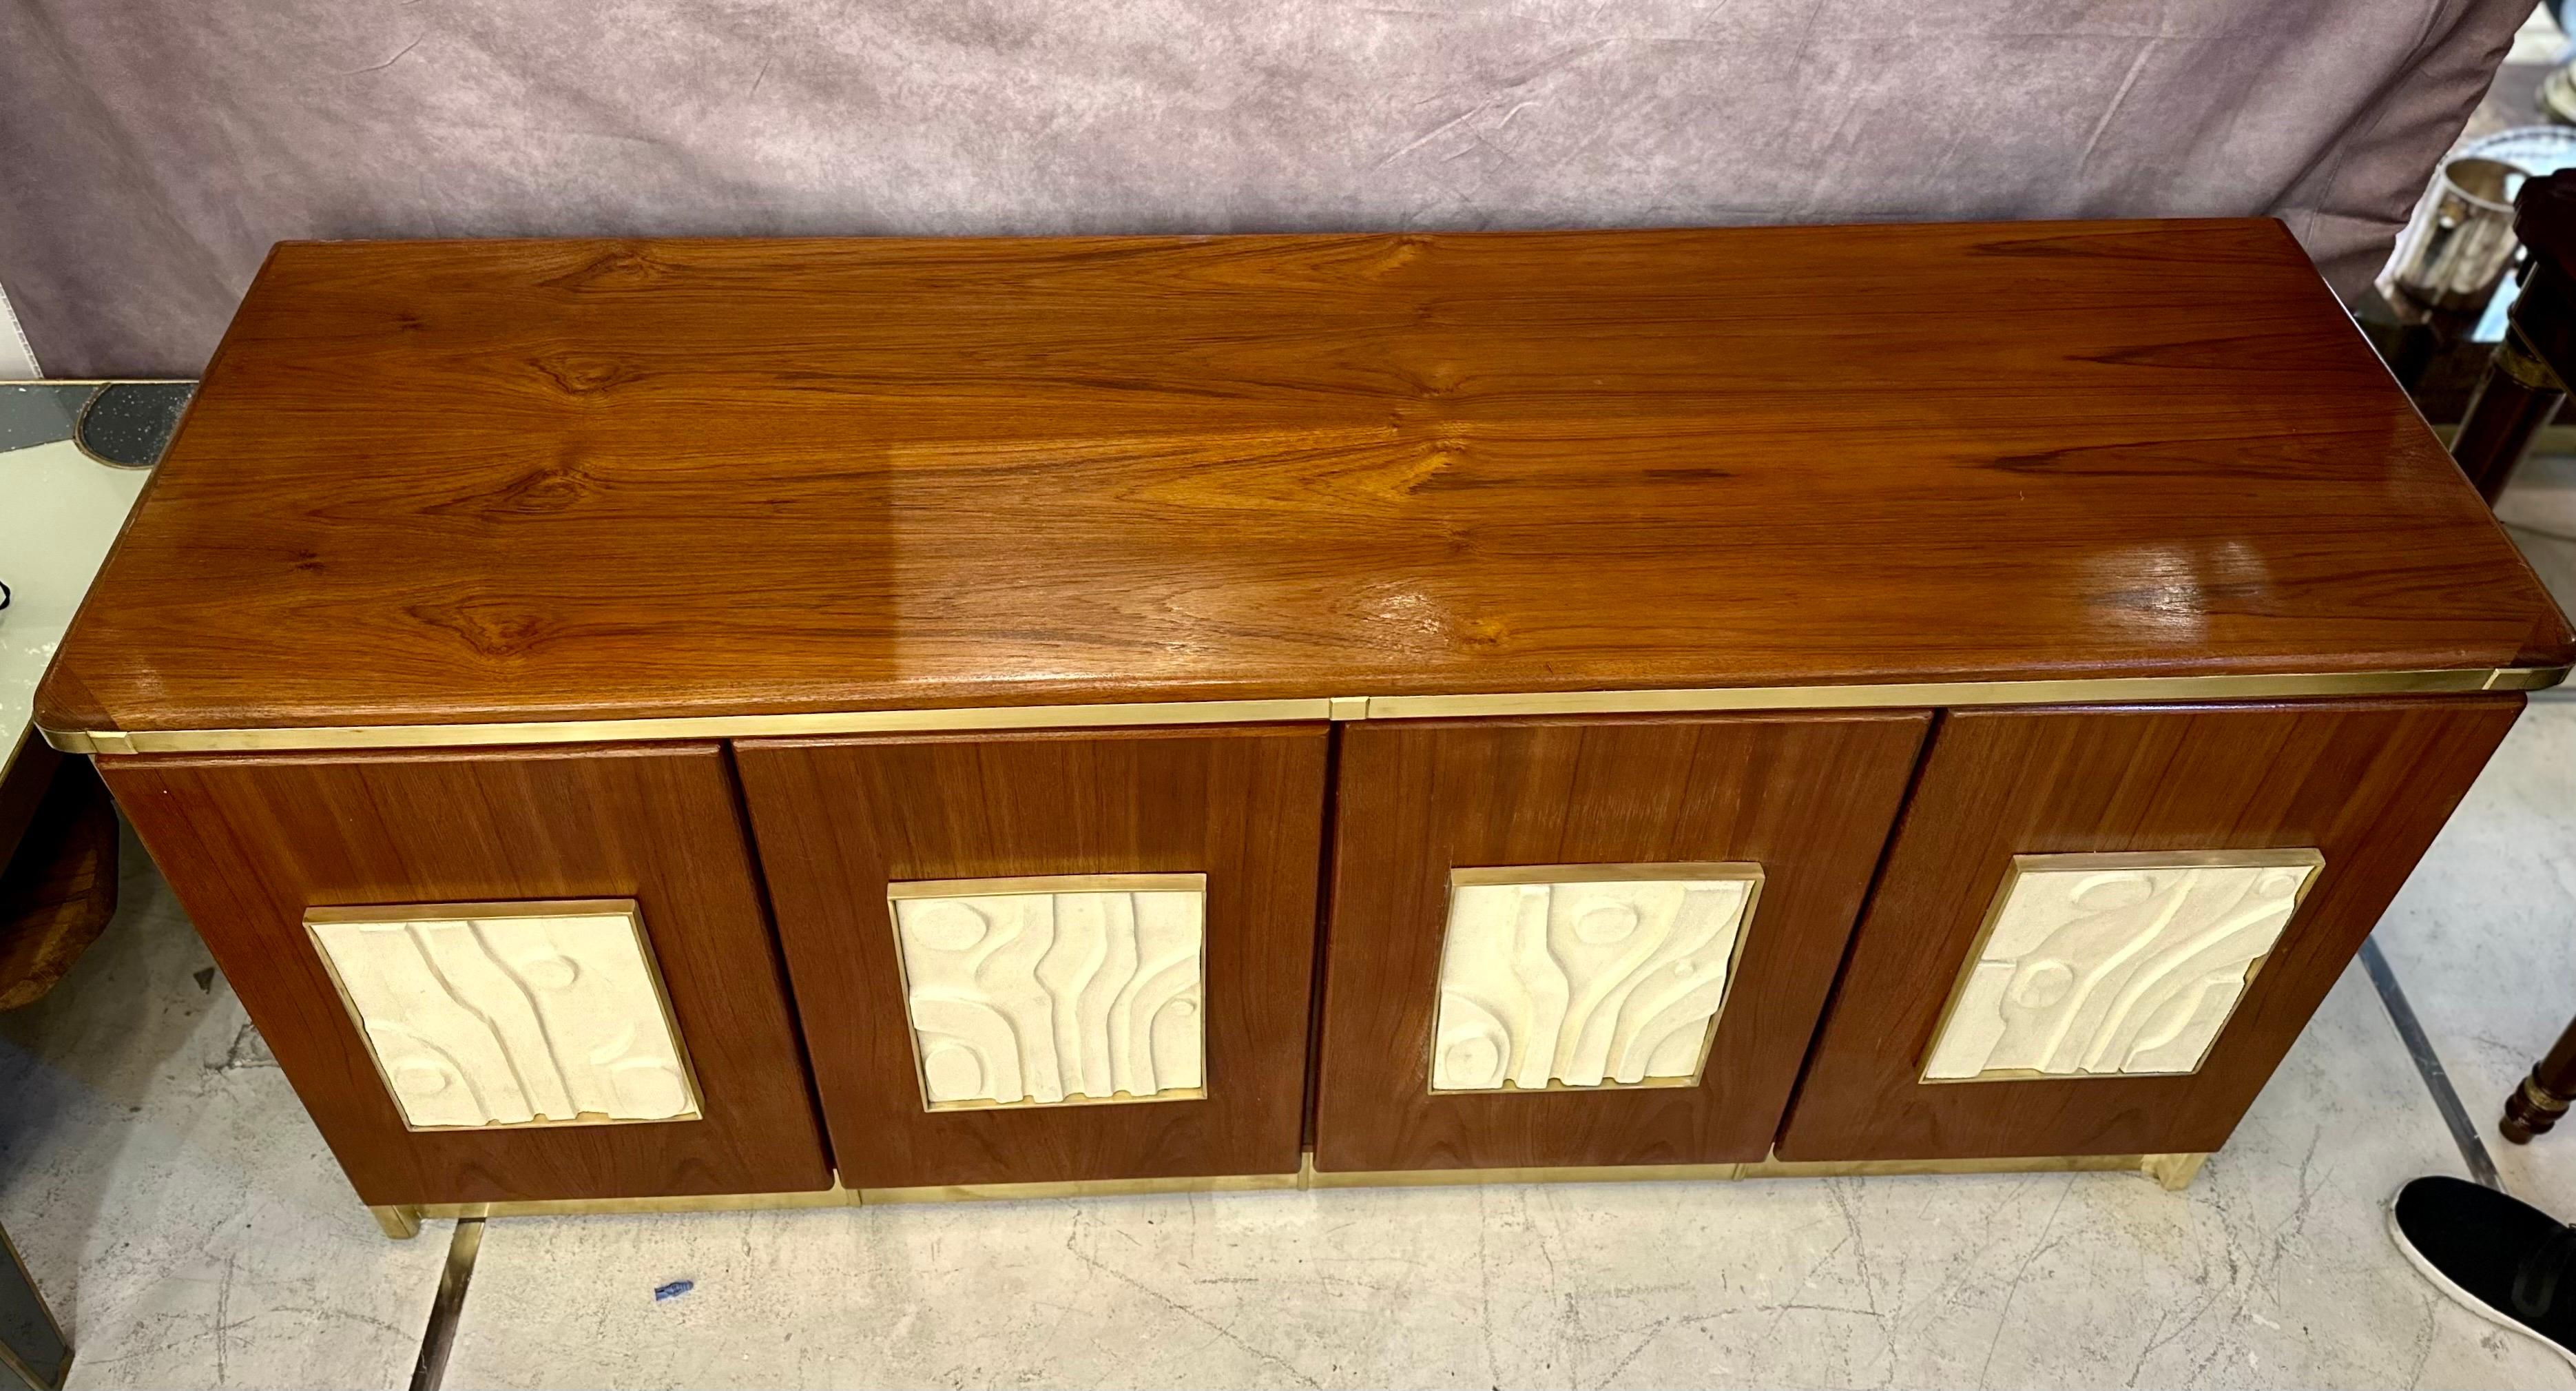 Custom Made Artisanal Wood Credenza with handmade Ceramic Inclusions by Kat’s For Sale 3